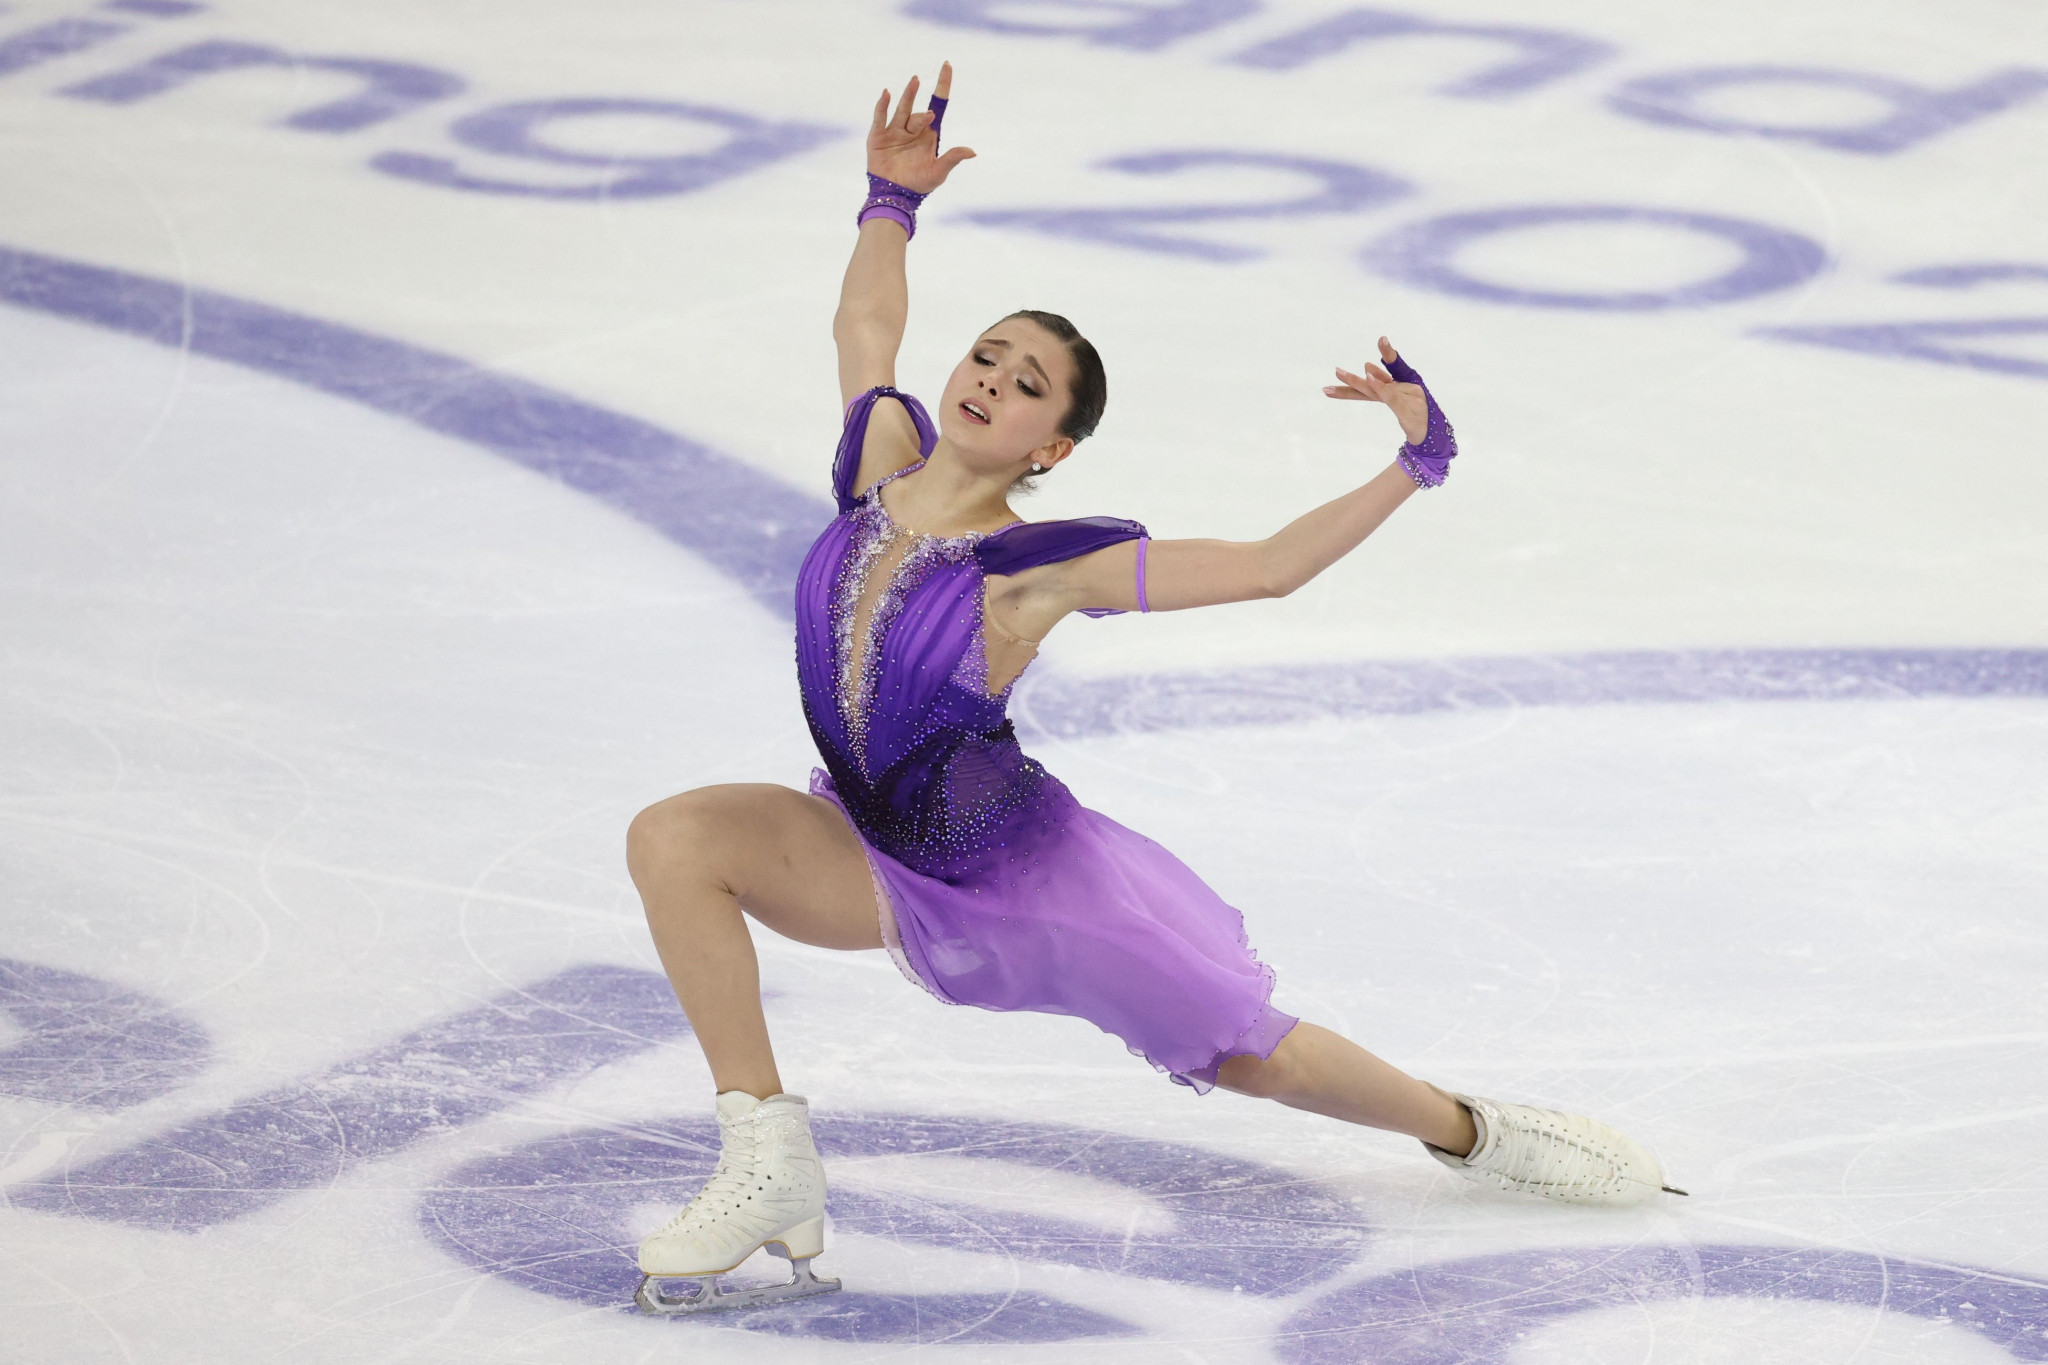 ROC's young figure skaters not required to receive vaccine for Beijing 2022